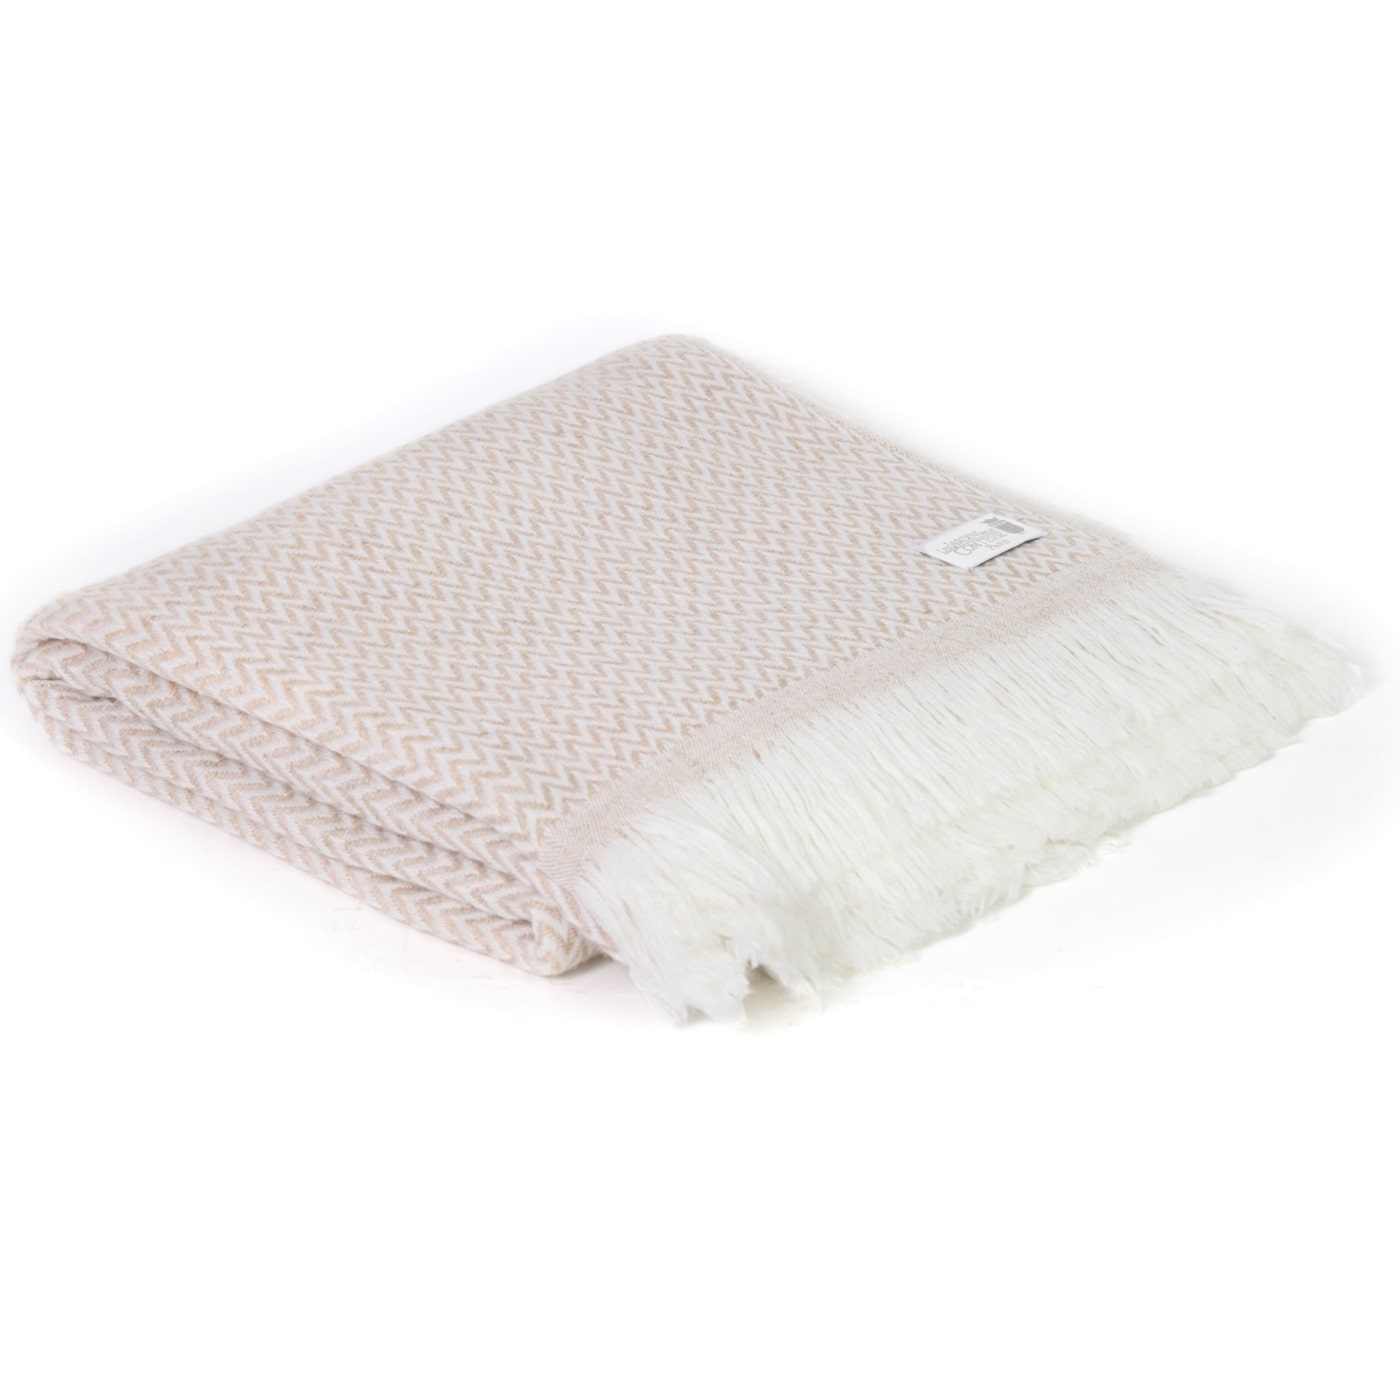 Camel lightweight cashmere and wool throw - 130 x 230 cm